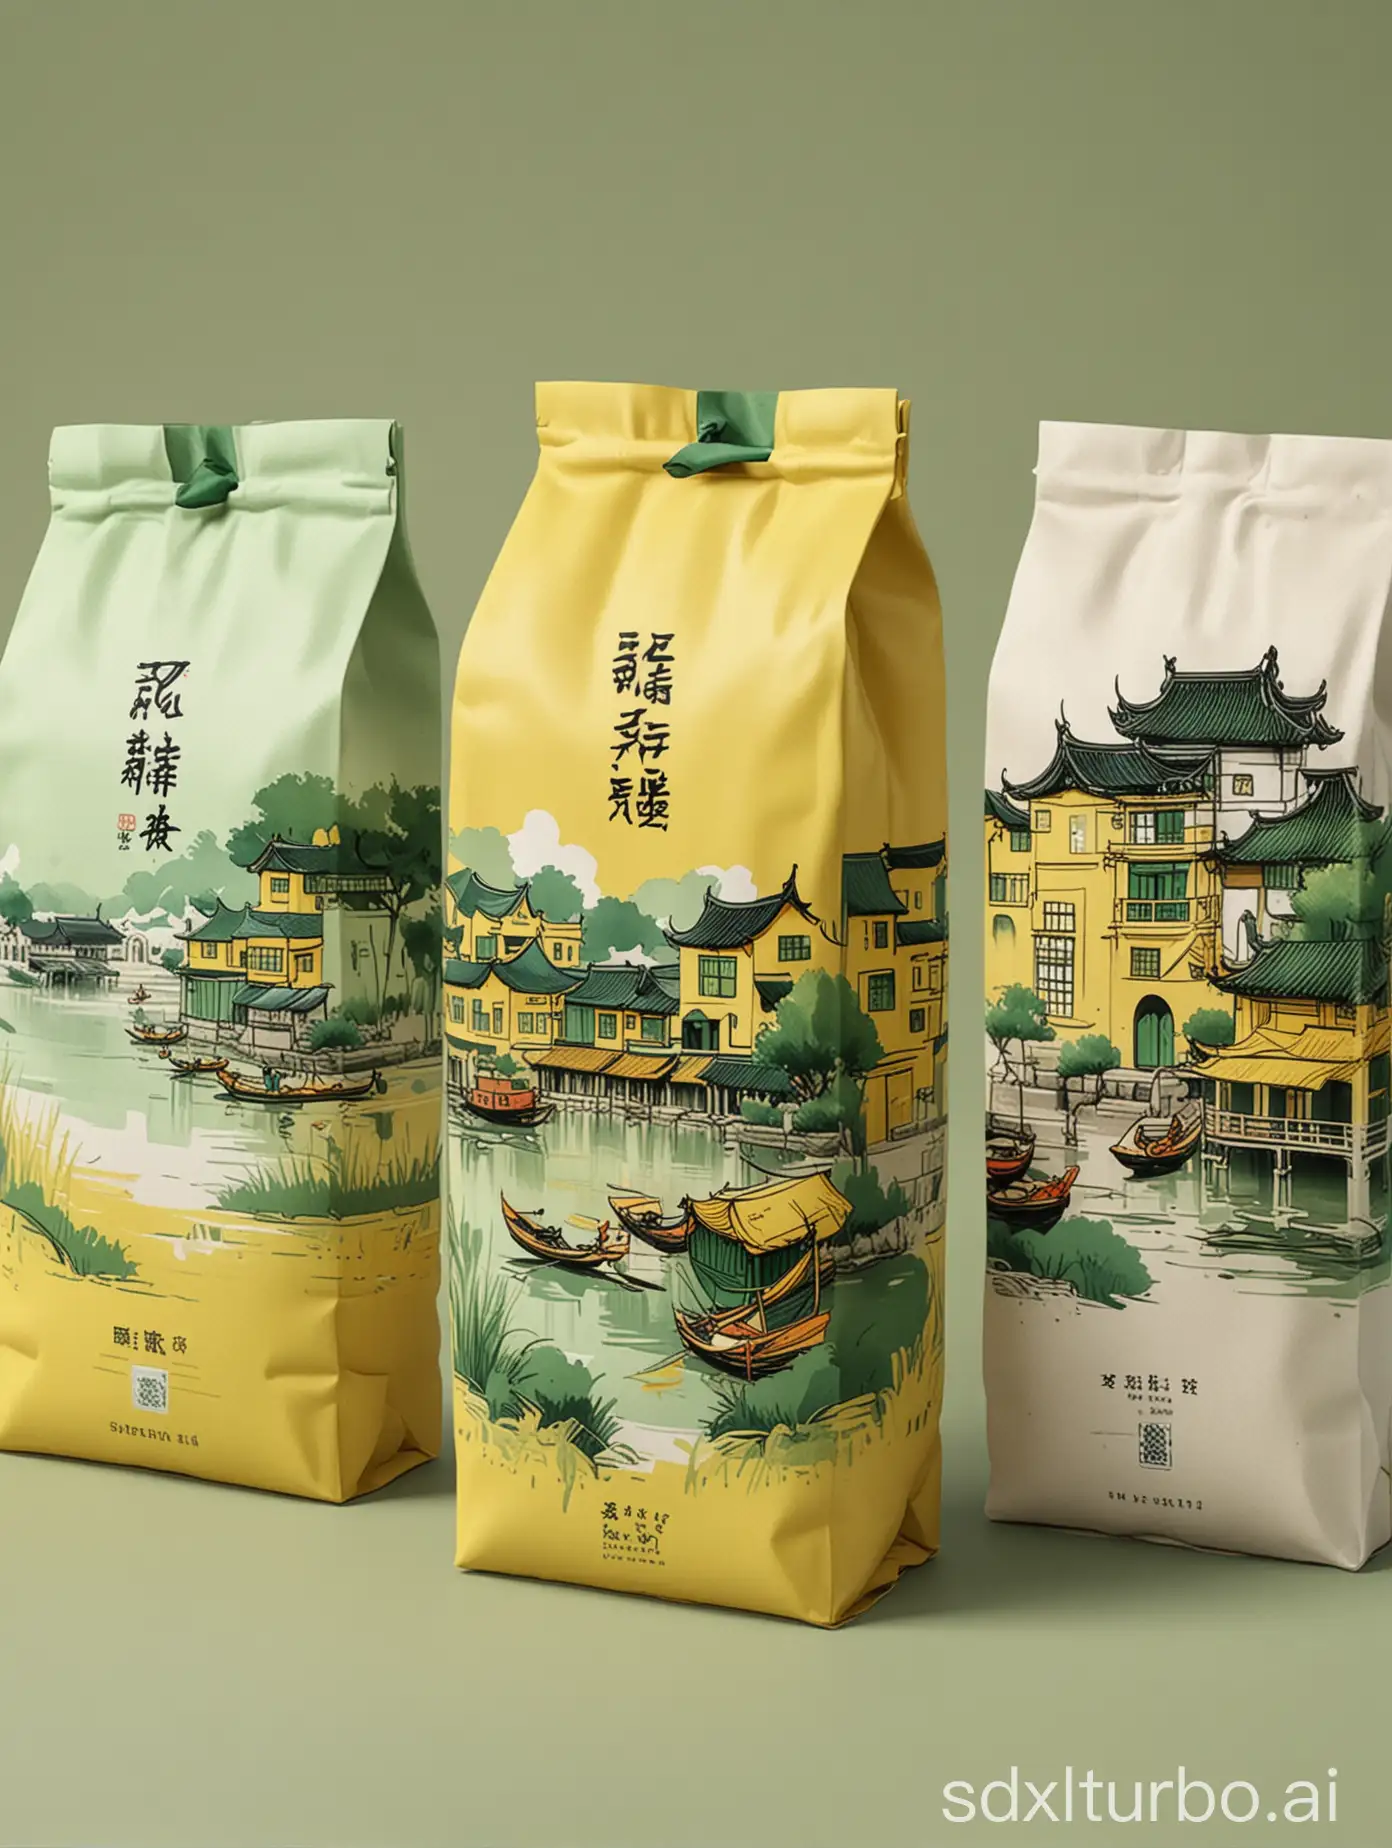 Jiangnan-Water-Village-Rice-Bag-Packaging-Grand-and-Vibrant-Yellow-and-Green-Theme